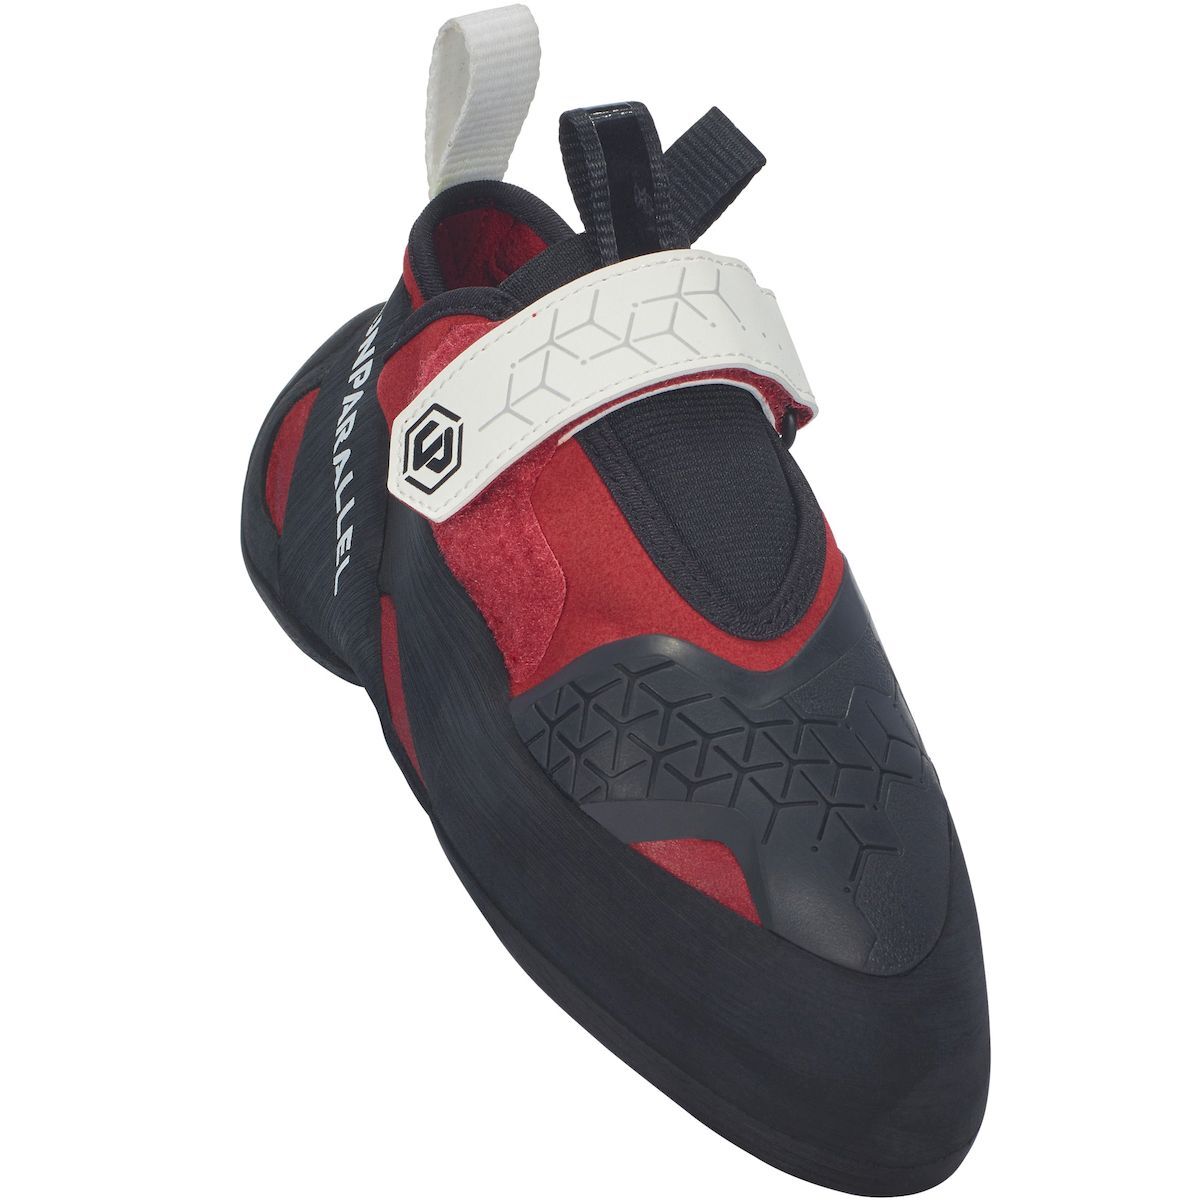 Unparallel Flagship - Climbing shoes